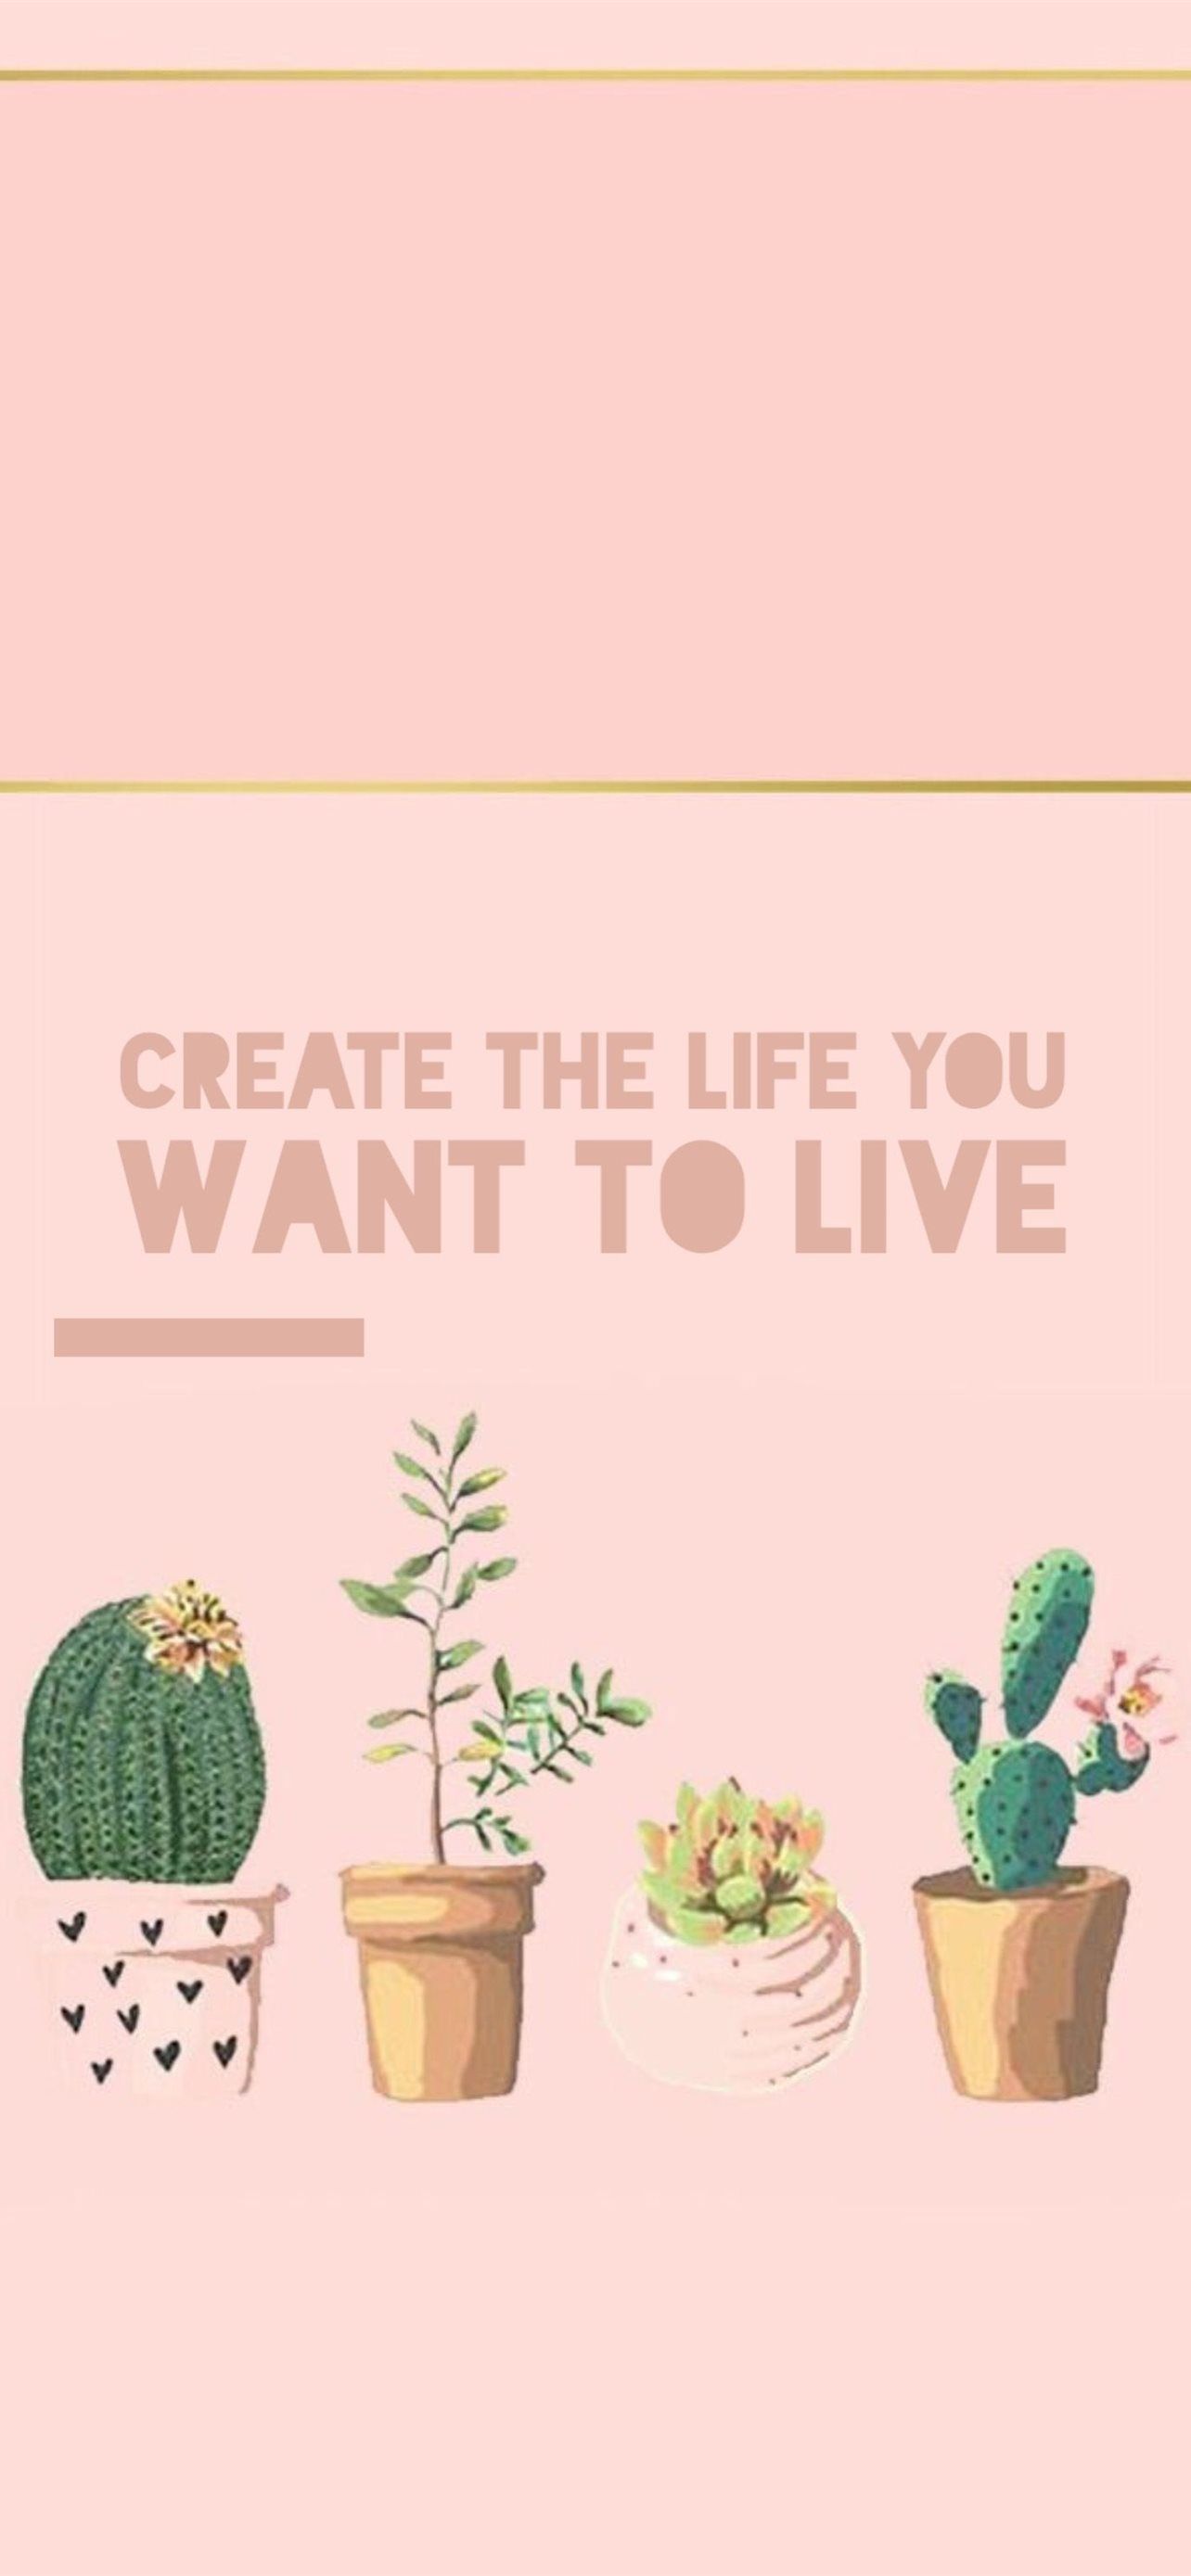 The image of a pink poster with plants and text - Summer, cactus